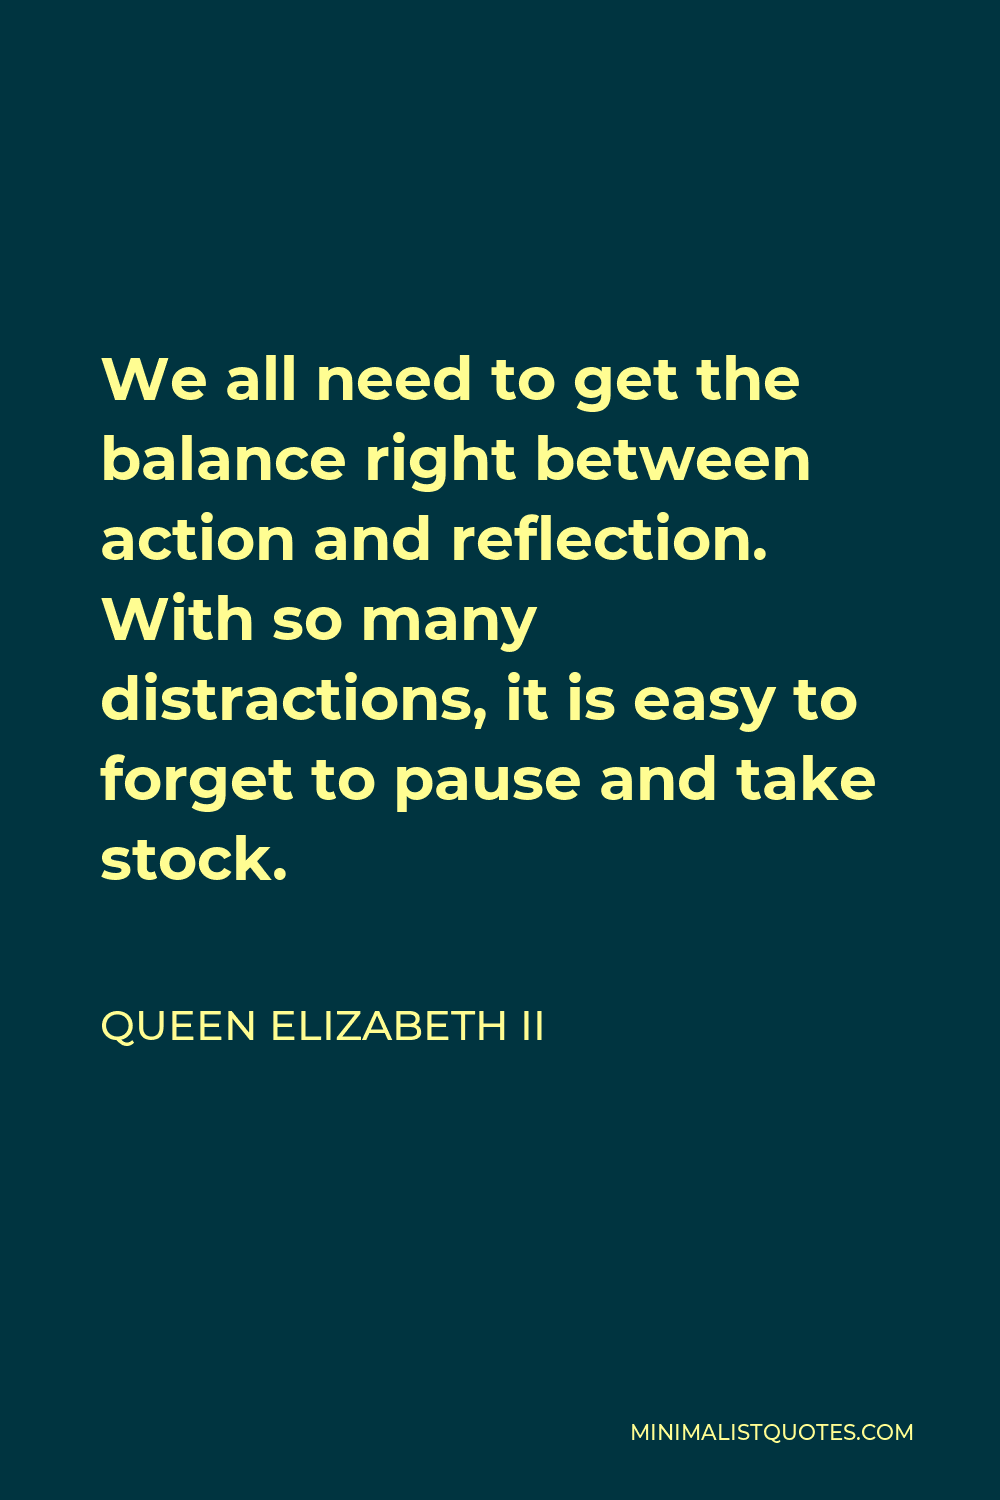 Queen Elizabeth II Quote - We all need to get the balance right between action and reflection. With so many distractions, it is easy to forget to pause and take stock.